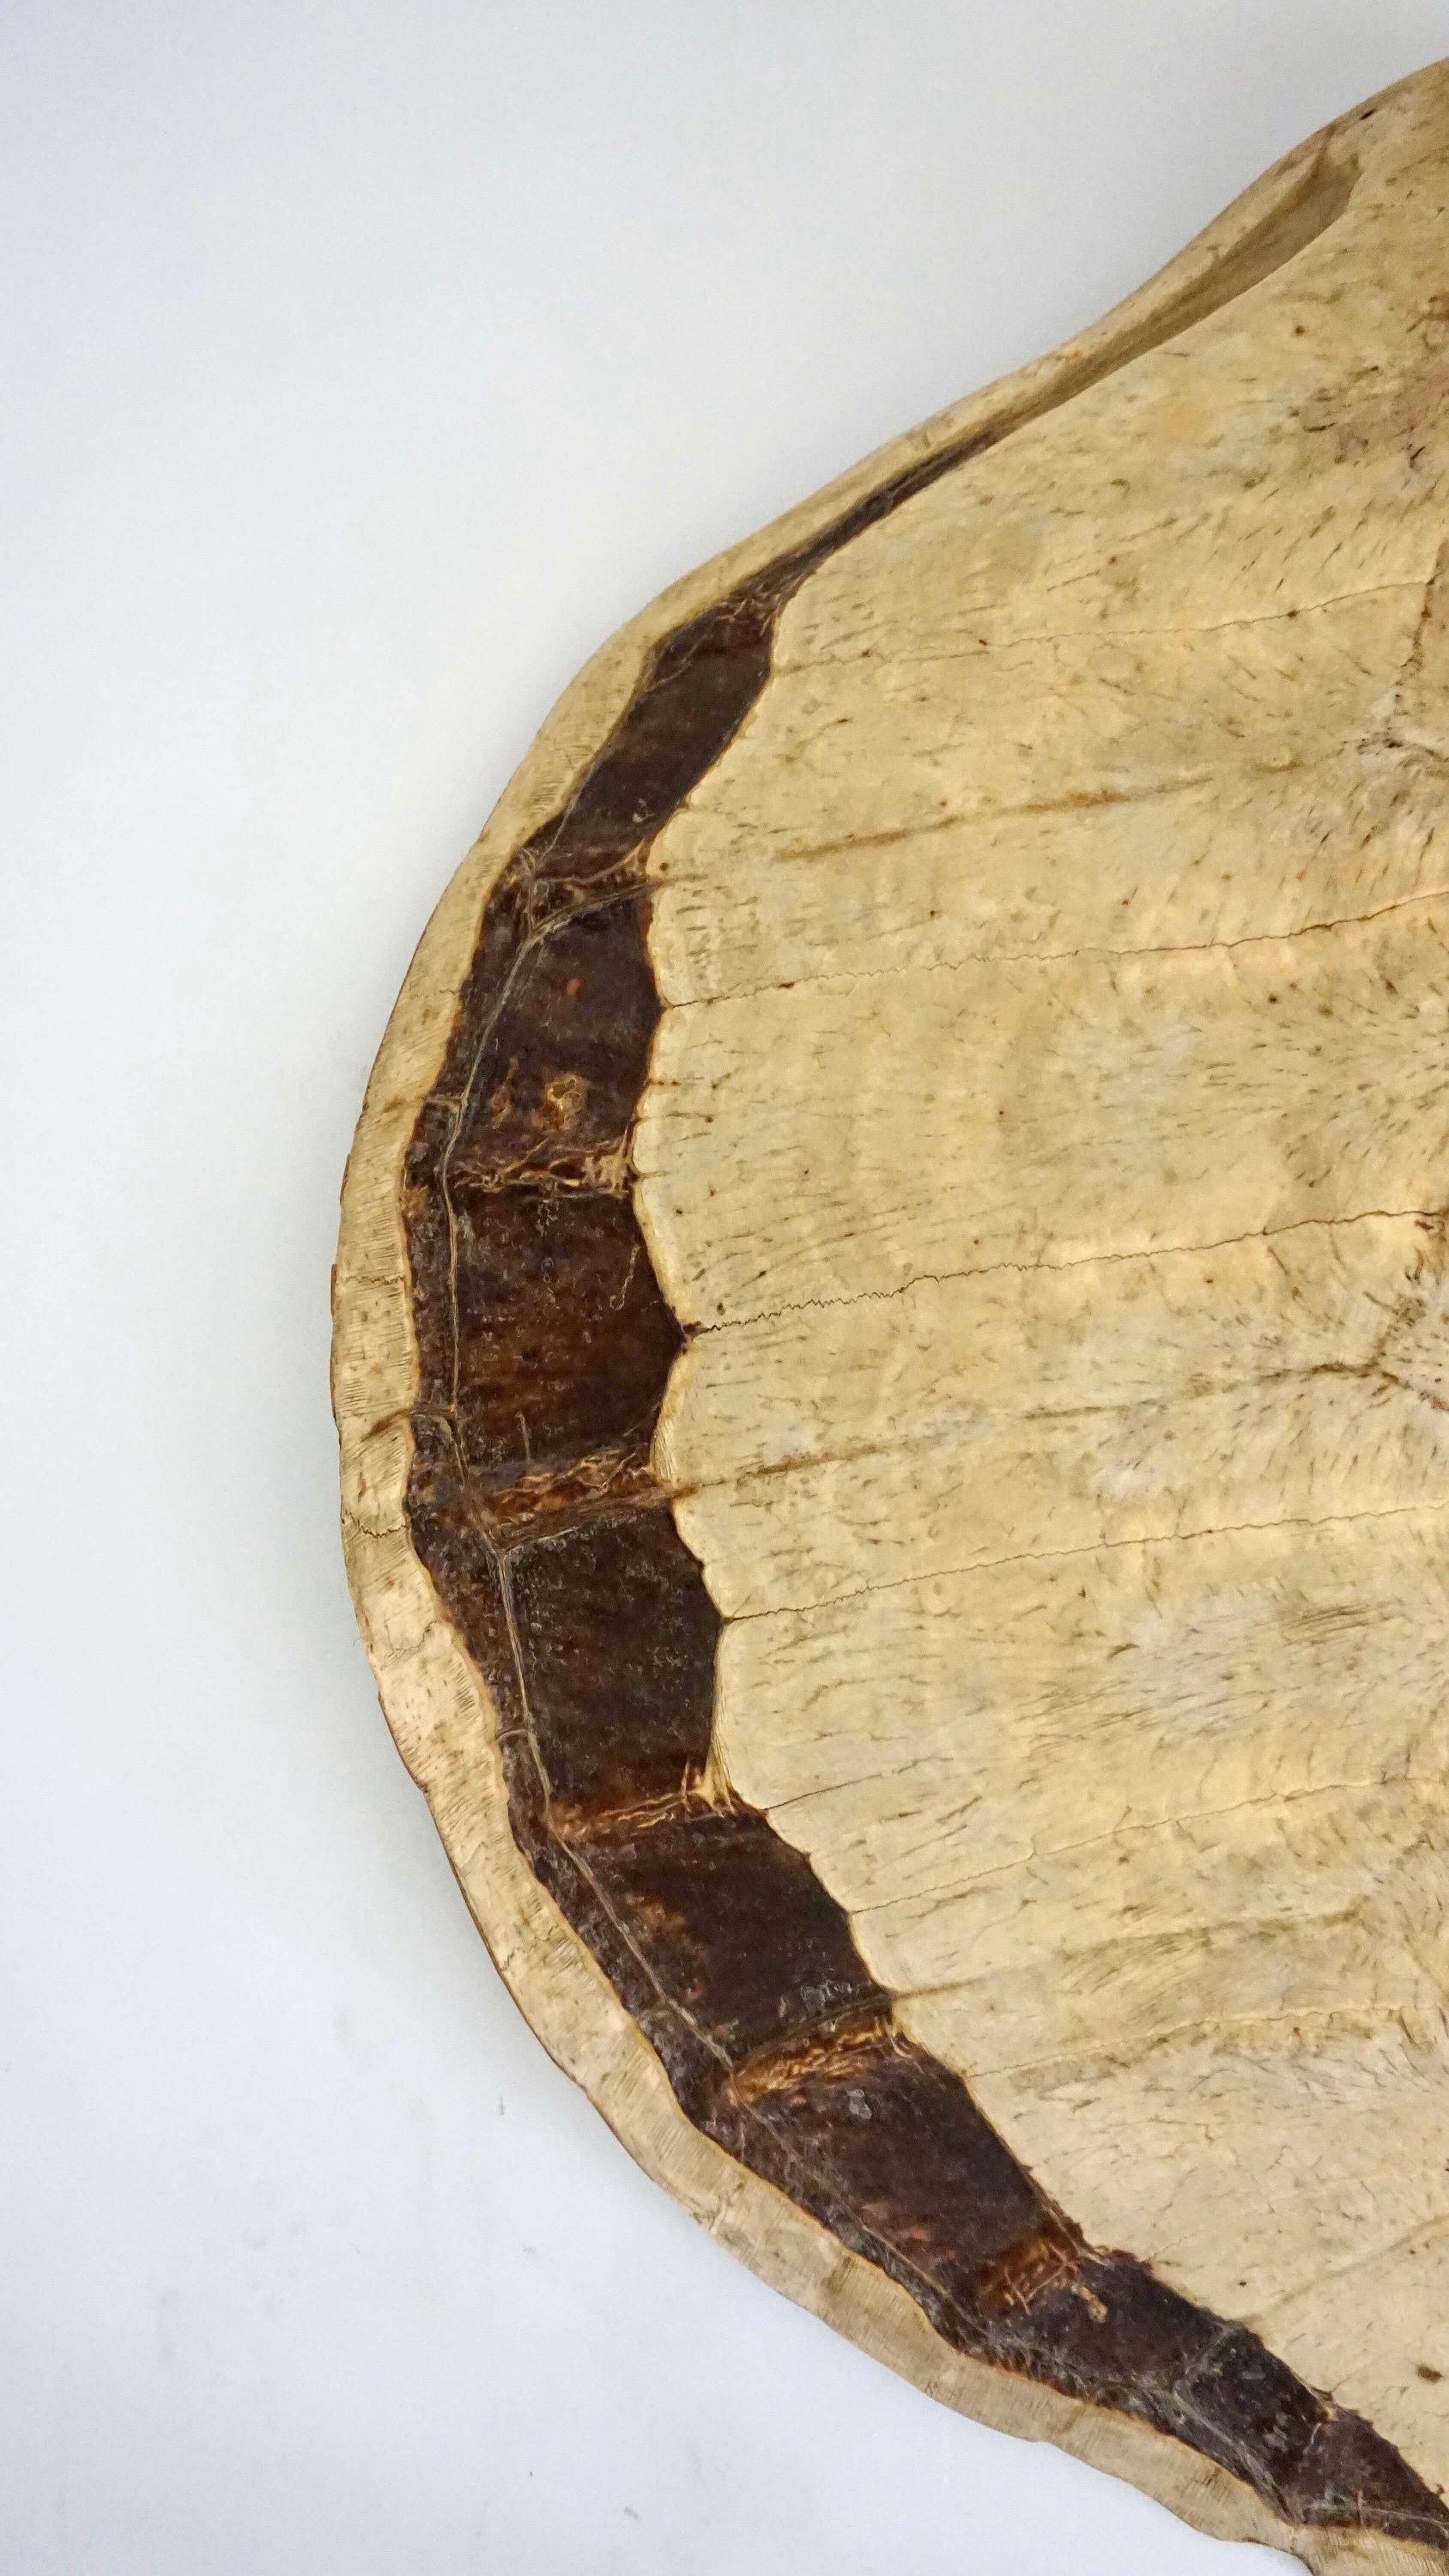 A large antique 19th-century giant sea turtle carapace (shell) specimen; the top and edges likely having been stripped for veneer. Provenance available upon request.